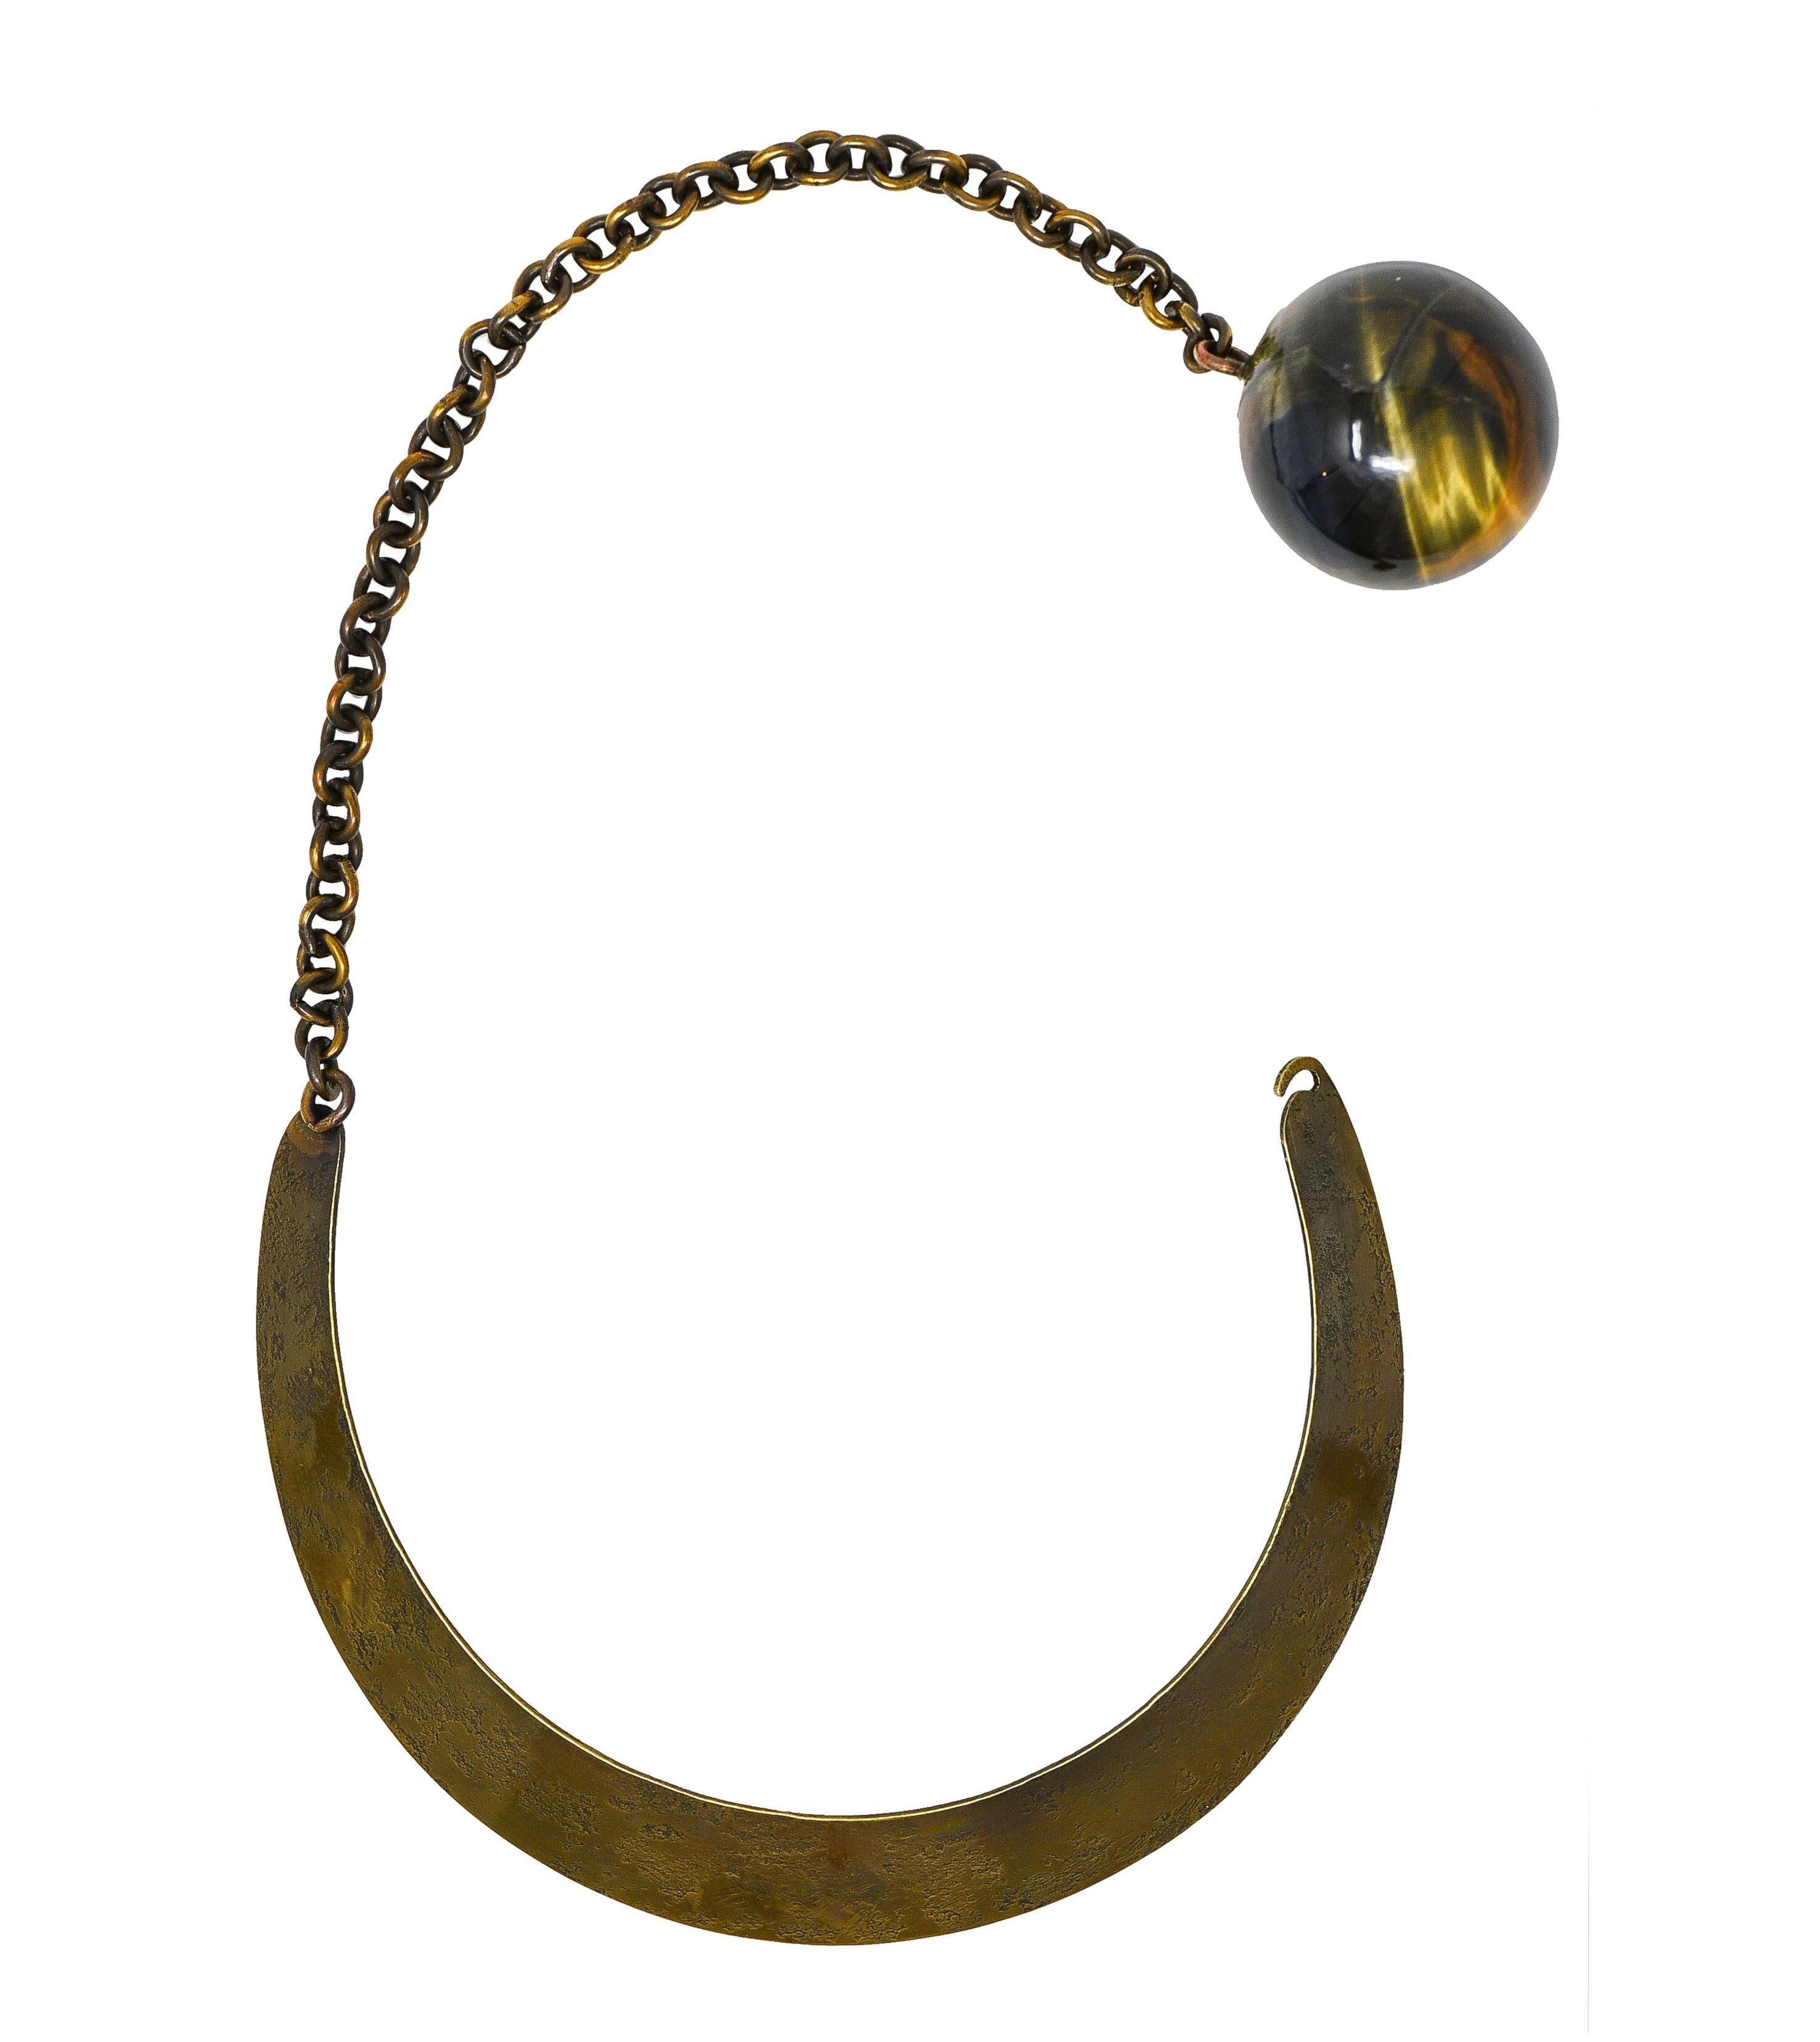 Art Smith 1950's Modernist Tiger's Eye Brass Sphere Vintage Collar Necklace In Excellent Condition For Sale In Philadelphia, PA